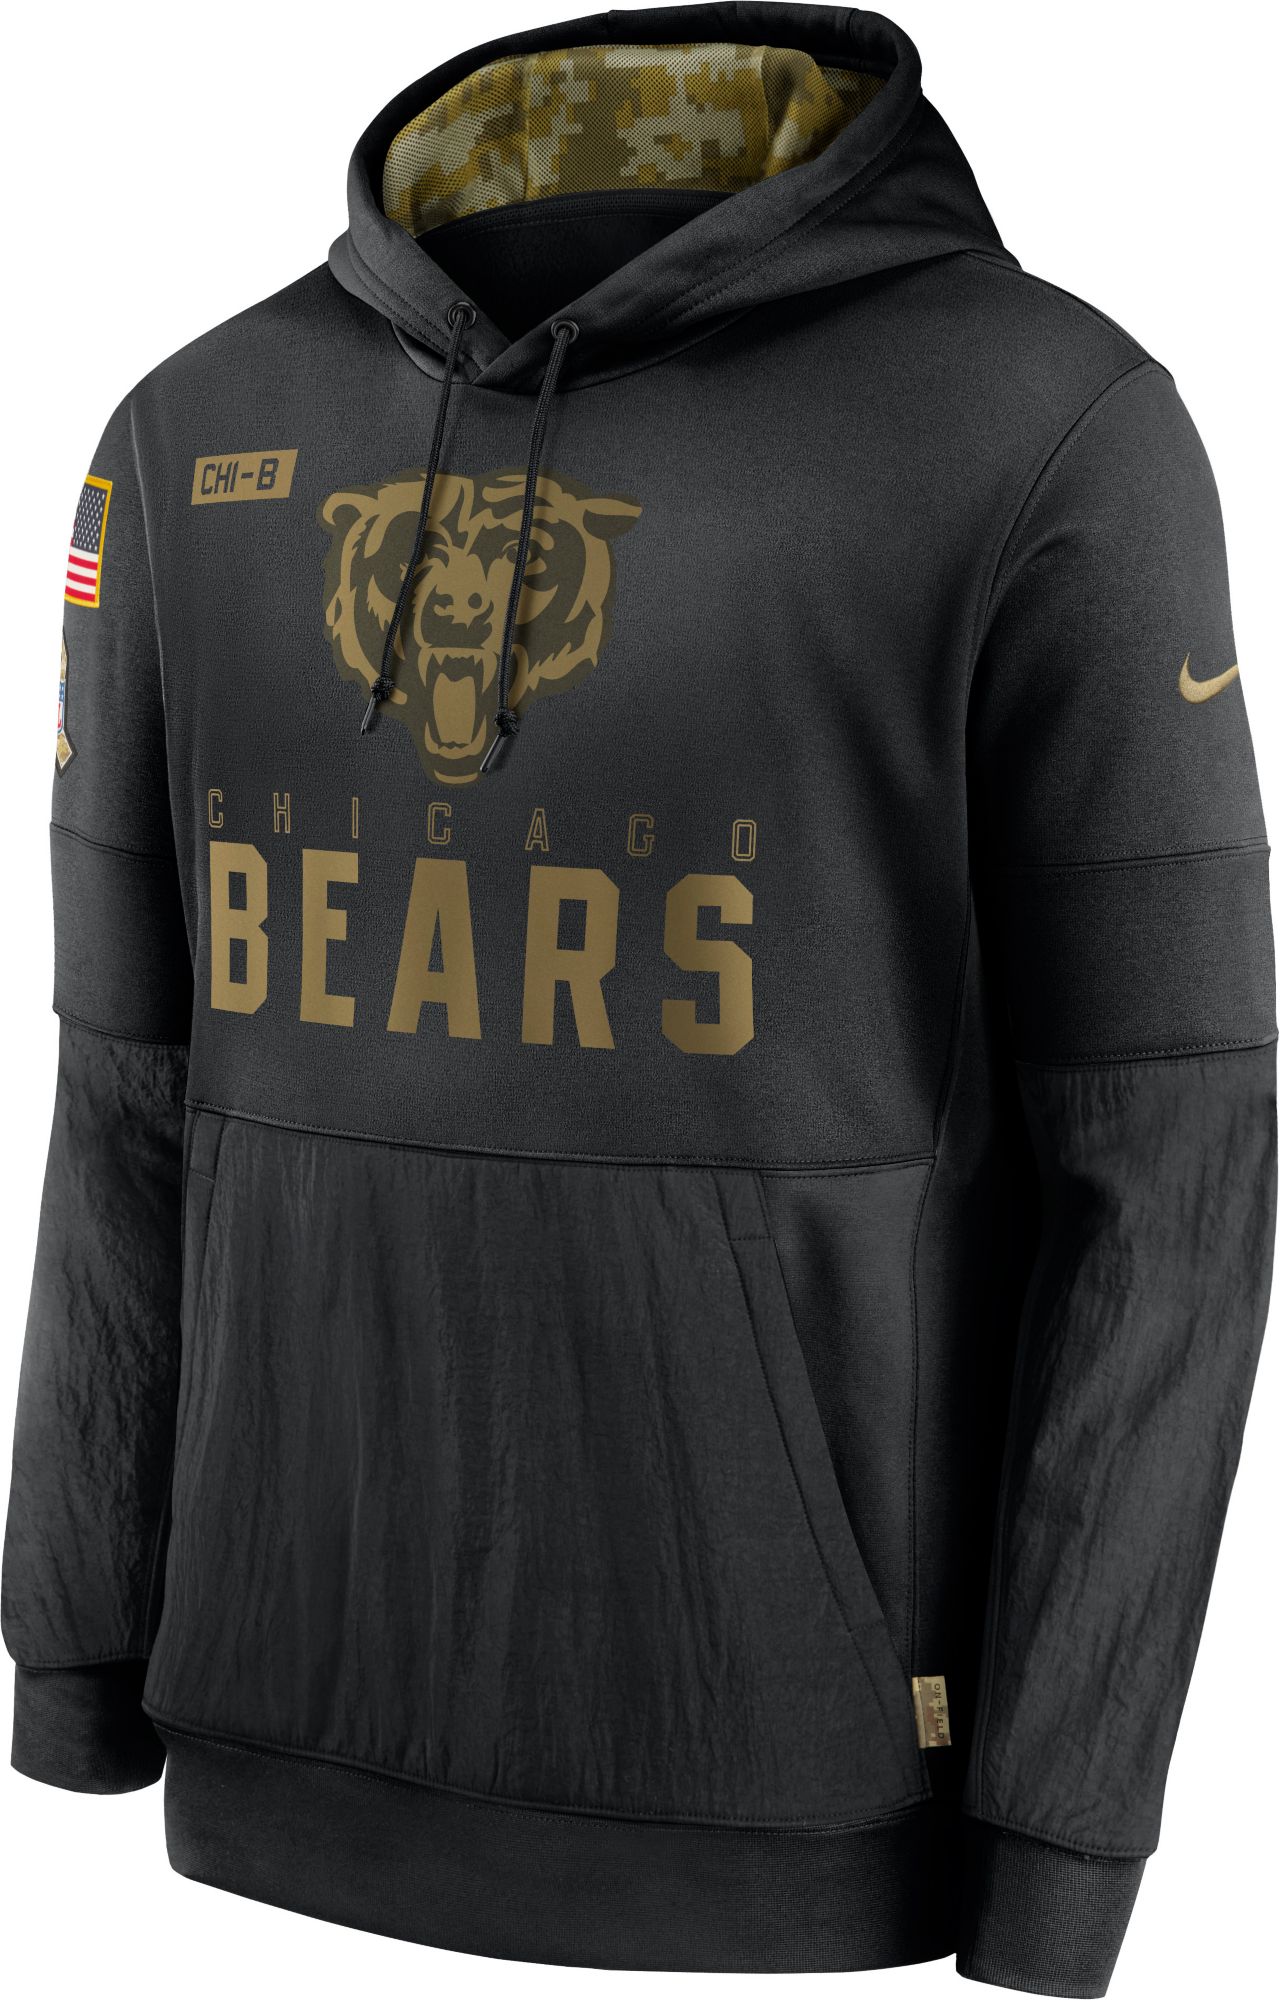 bears salute to service jersey